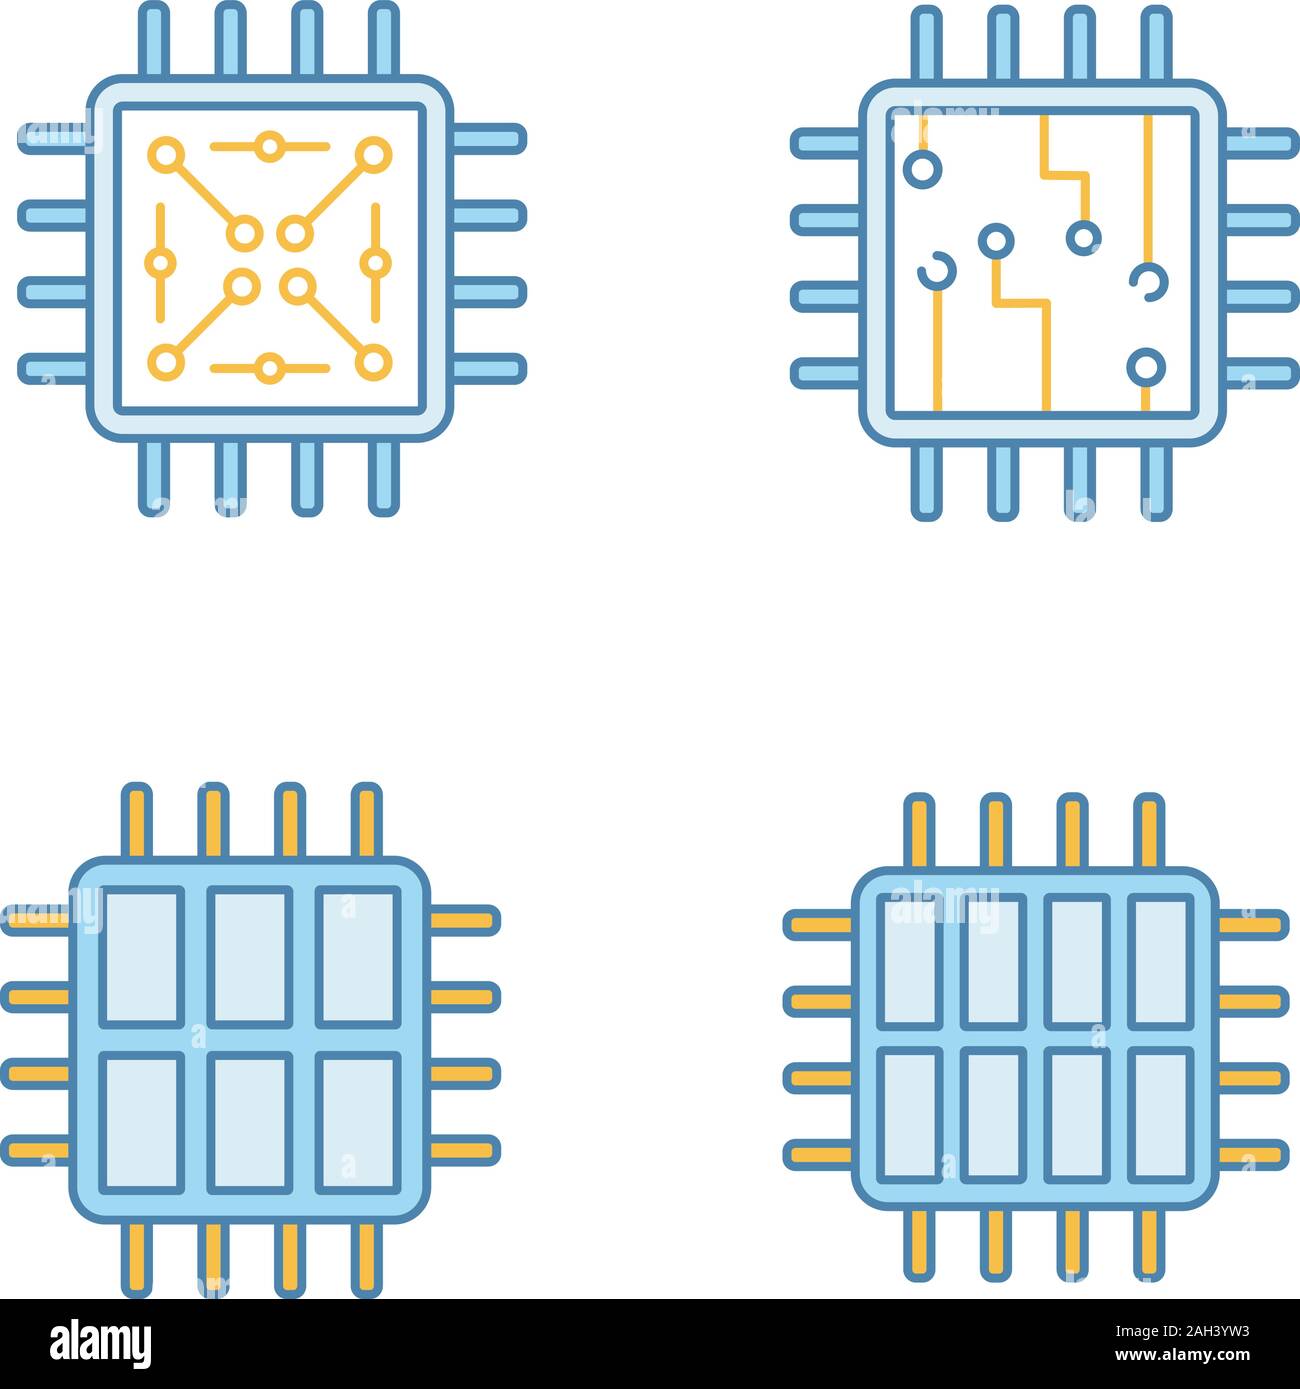 Processors color icons set. Chip, microprocessor, integrated unit, six and octa core processors. Isolated vector illustrations Stock Vector